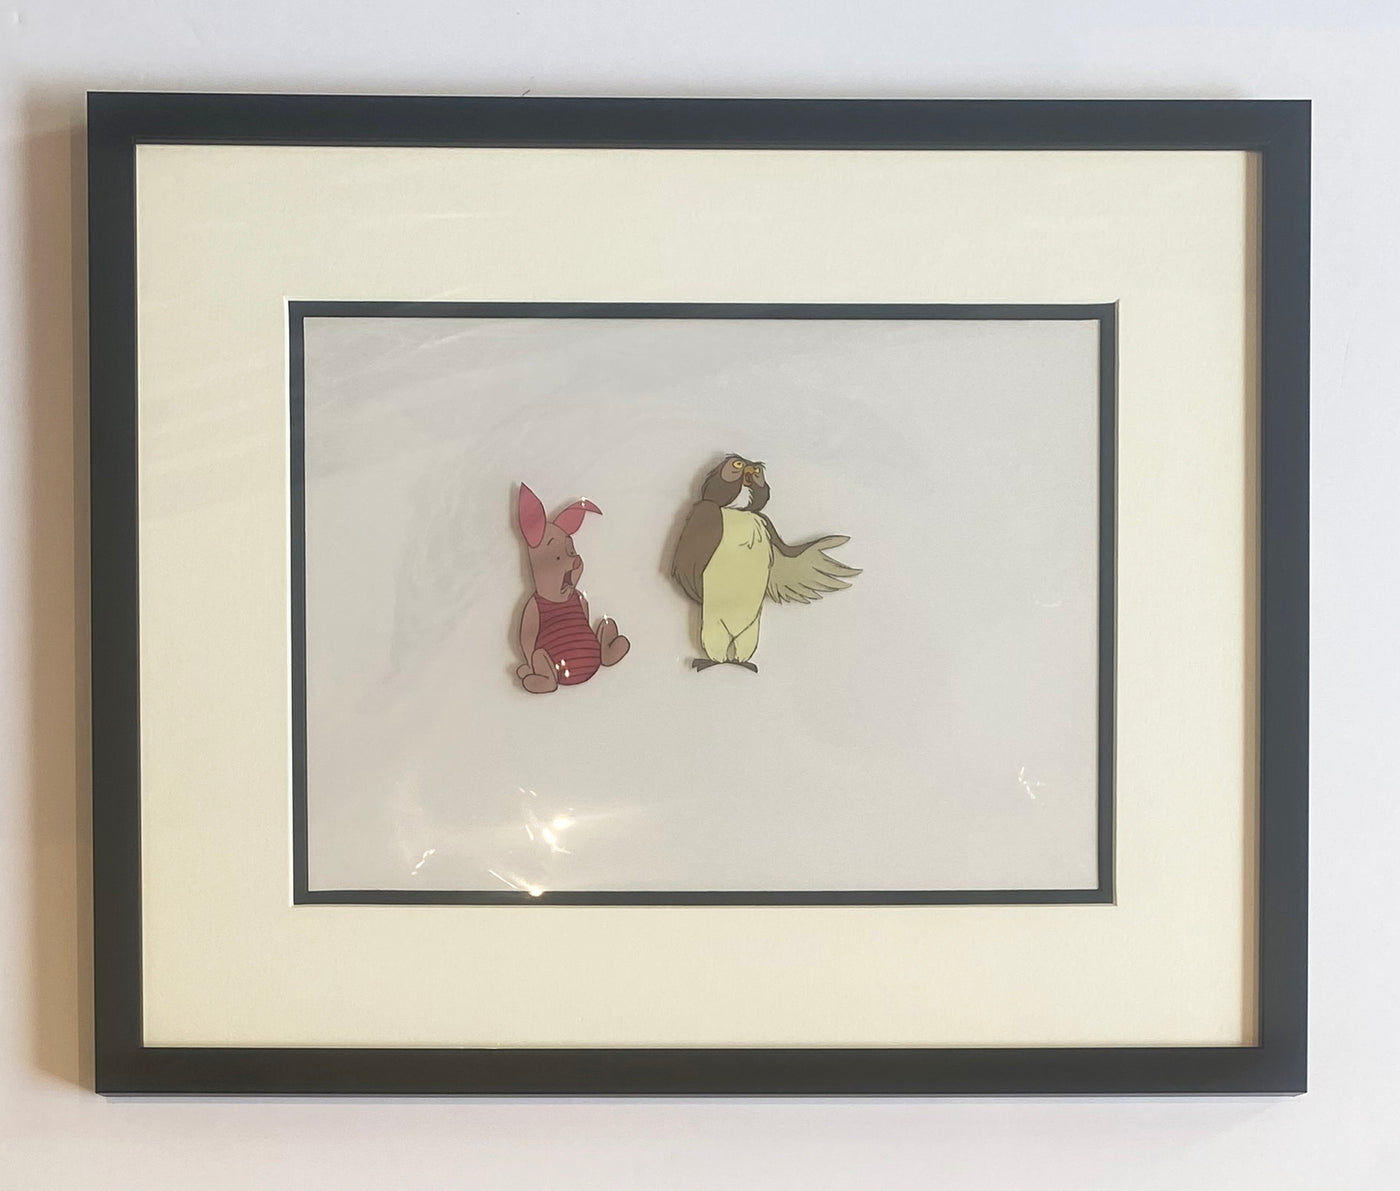 Original Walt Disney Production Cels from The Many Adventures of Winnie the Pooh featuring Piglet and Owl